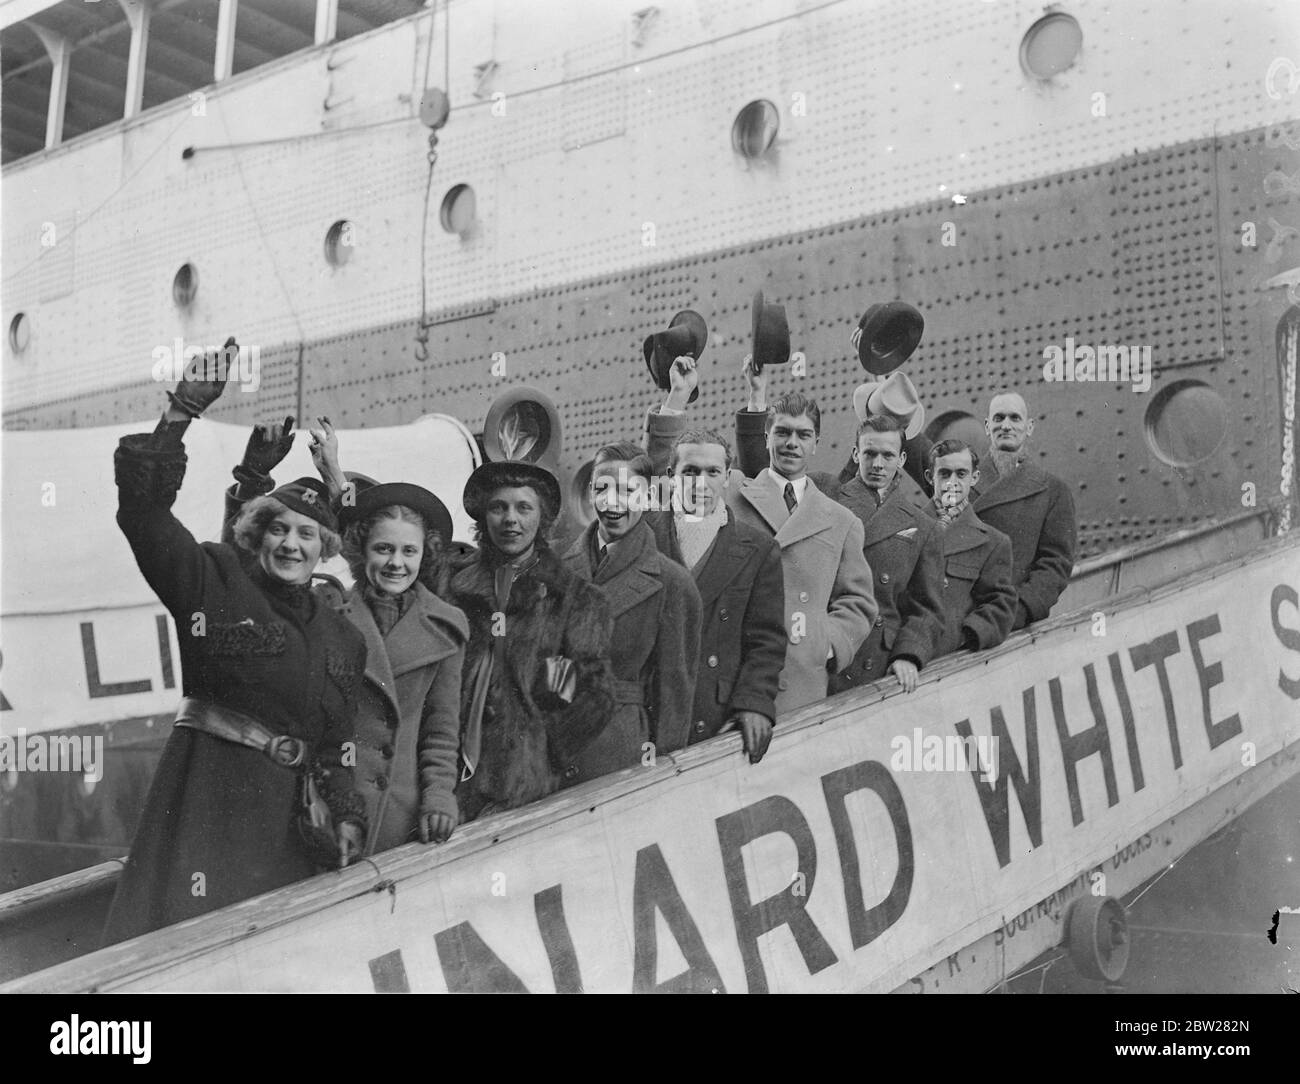 US table tennis team arrived for world Championships. The United States table tennis team which is to compete in the forthcoming world Championships in London, arrived at Southampton on the liner 'Aquitania'. Photo shows, the American team on arrival at Southampton, left to right, Clara Harrison, Betty Henry, Mildred Wilkinson, George Hendry, Sol Schiff, Burnard Grimes, Jimmy McClure, Louis Pagliare, and Moris B Bassford. 19 January 1938 Stock Photo